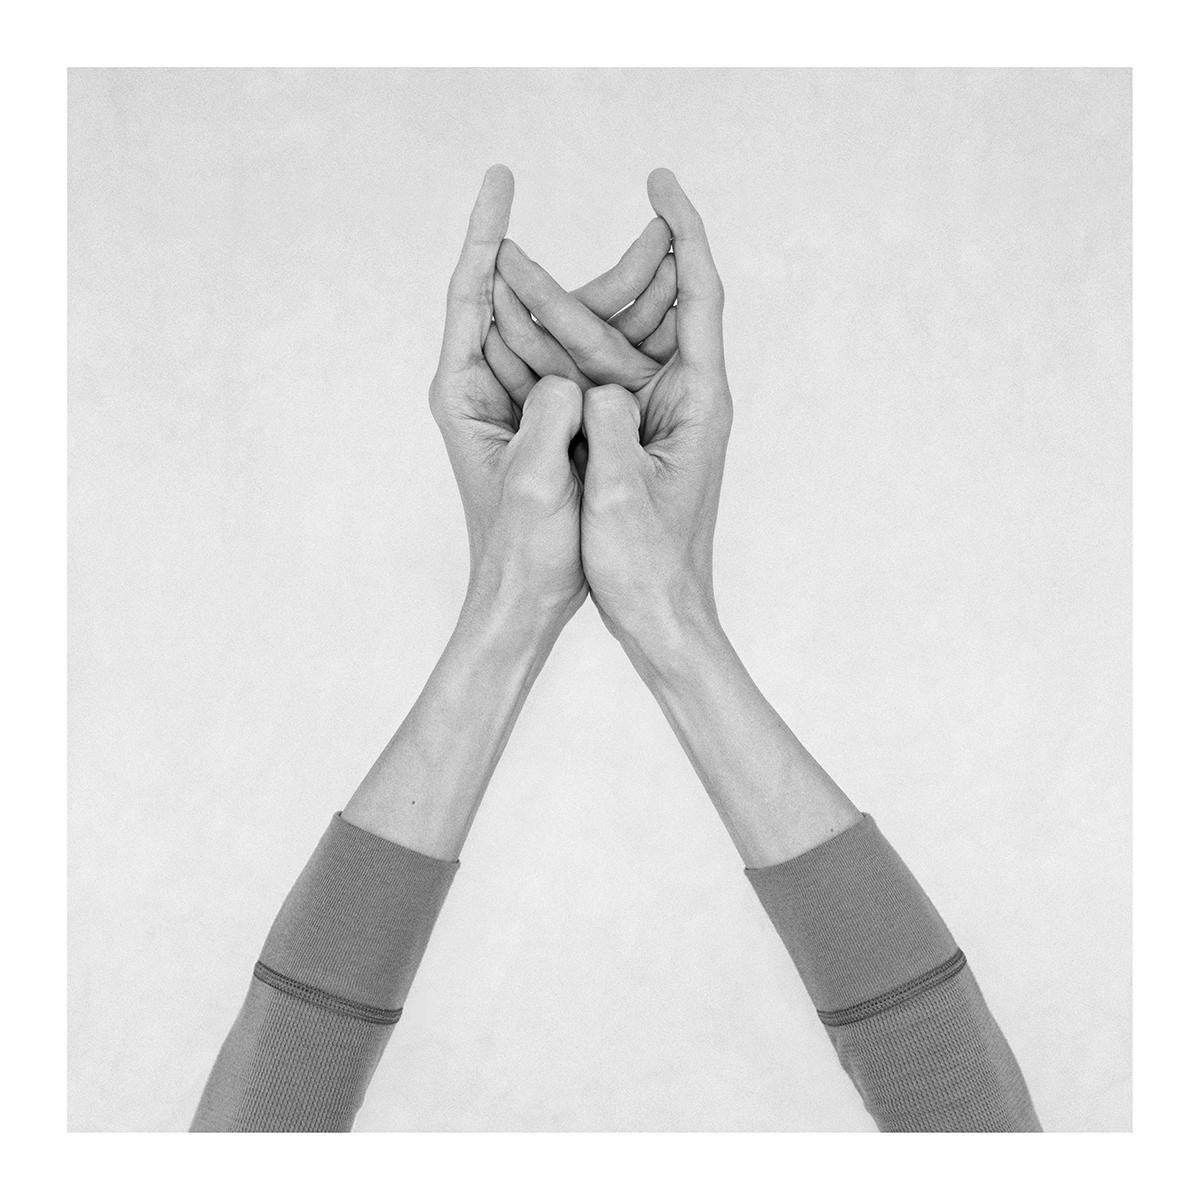 Nico Baixas / Gos-com-fuig Figurative Photograph - Untitled XXII. From the Series Chiromorphose. Hands. Black & White Photography